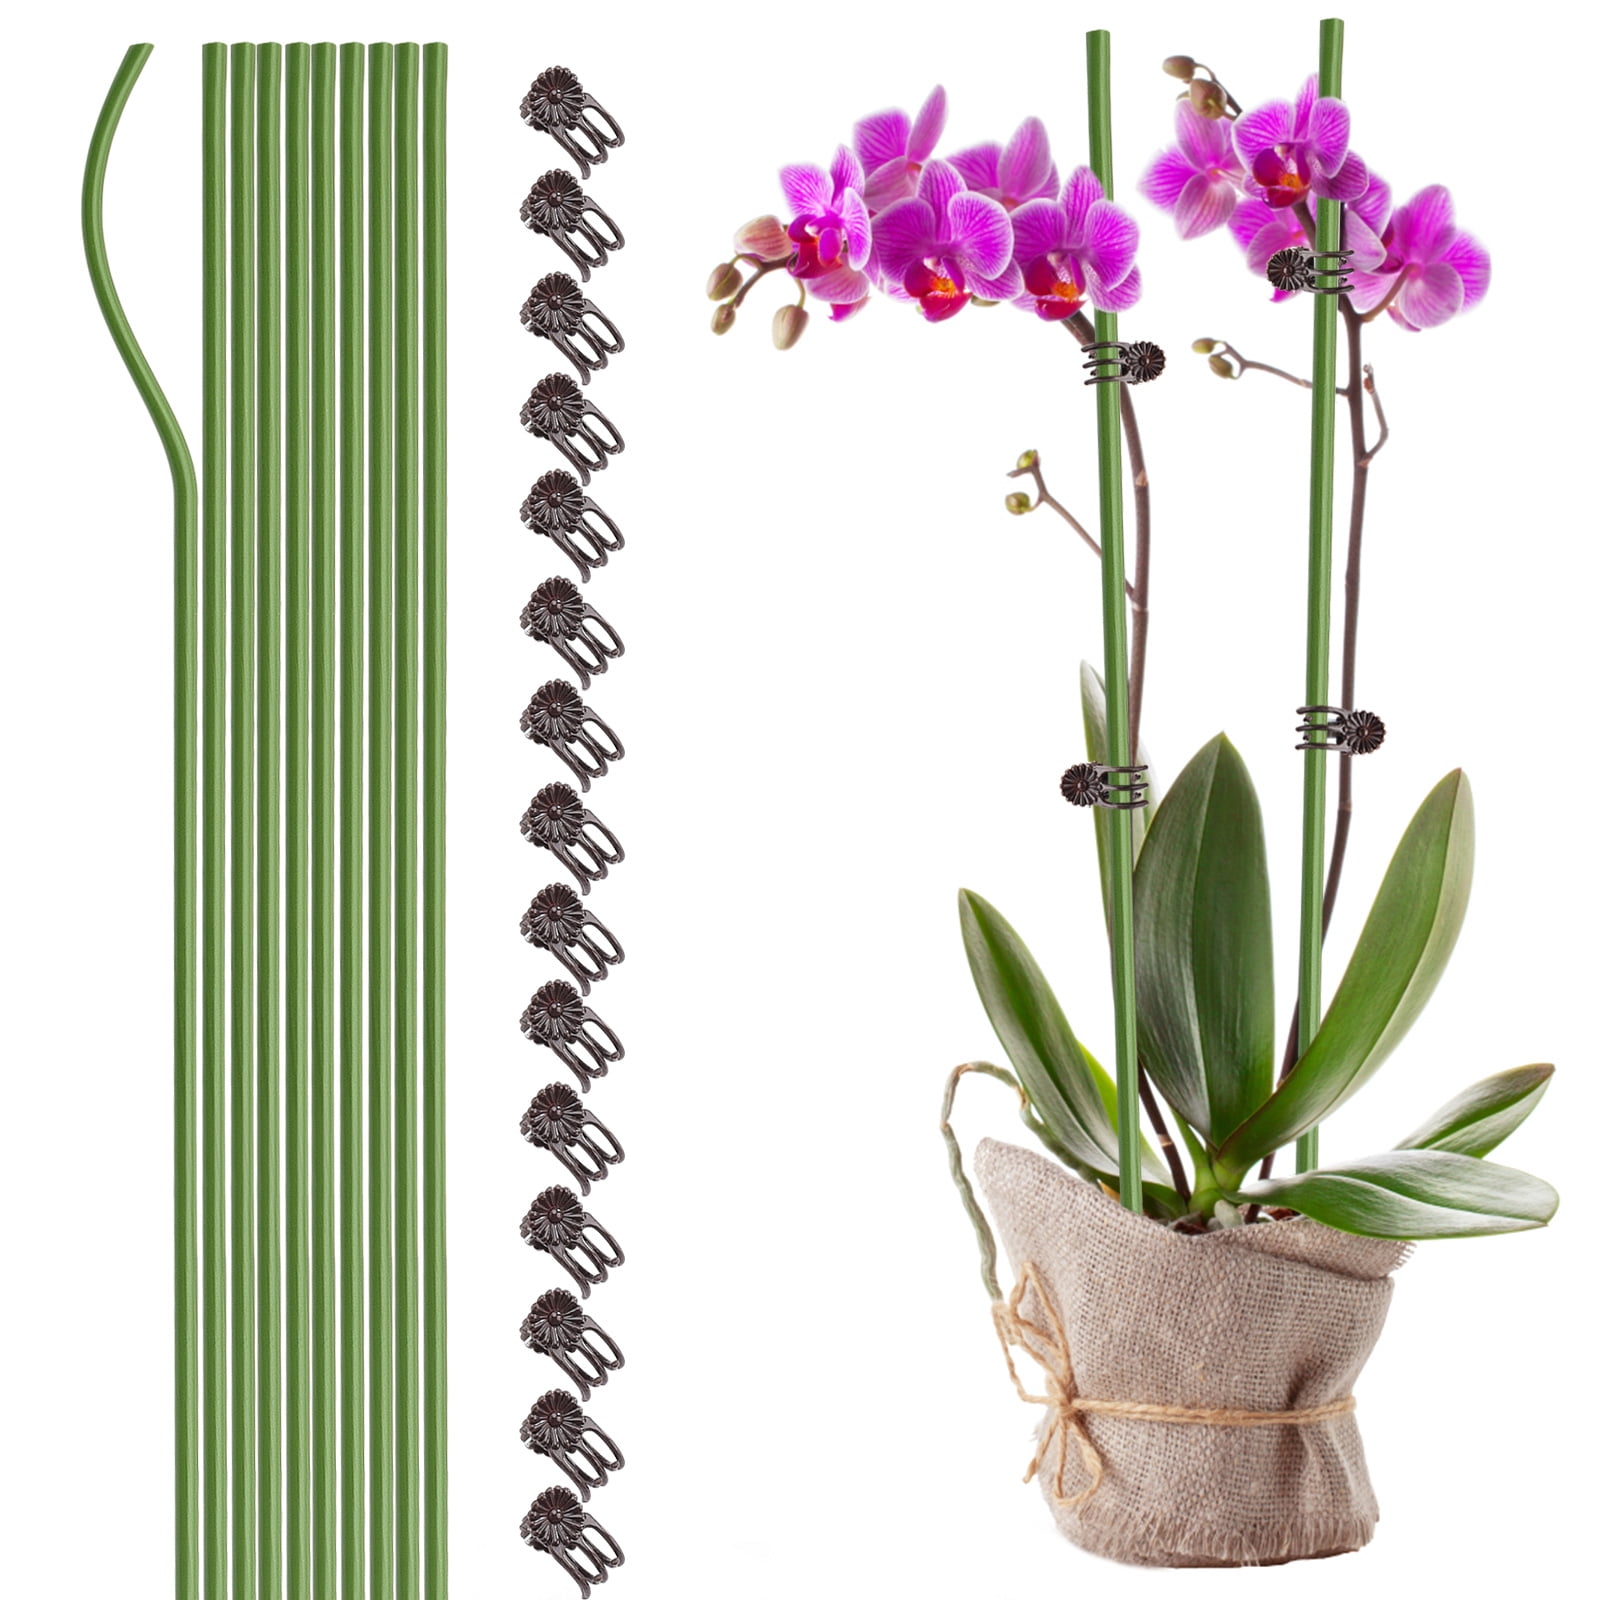 Details about   50Pcs Plants Fix Clips Orchid Stem Vine Support Flowers Tied Branch Clamping US 